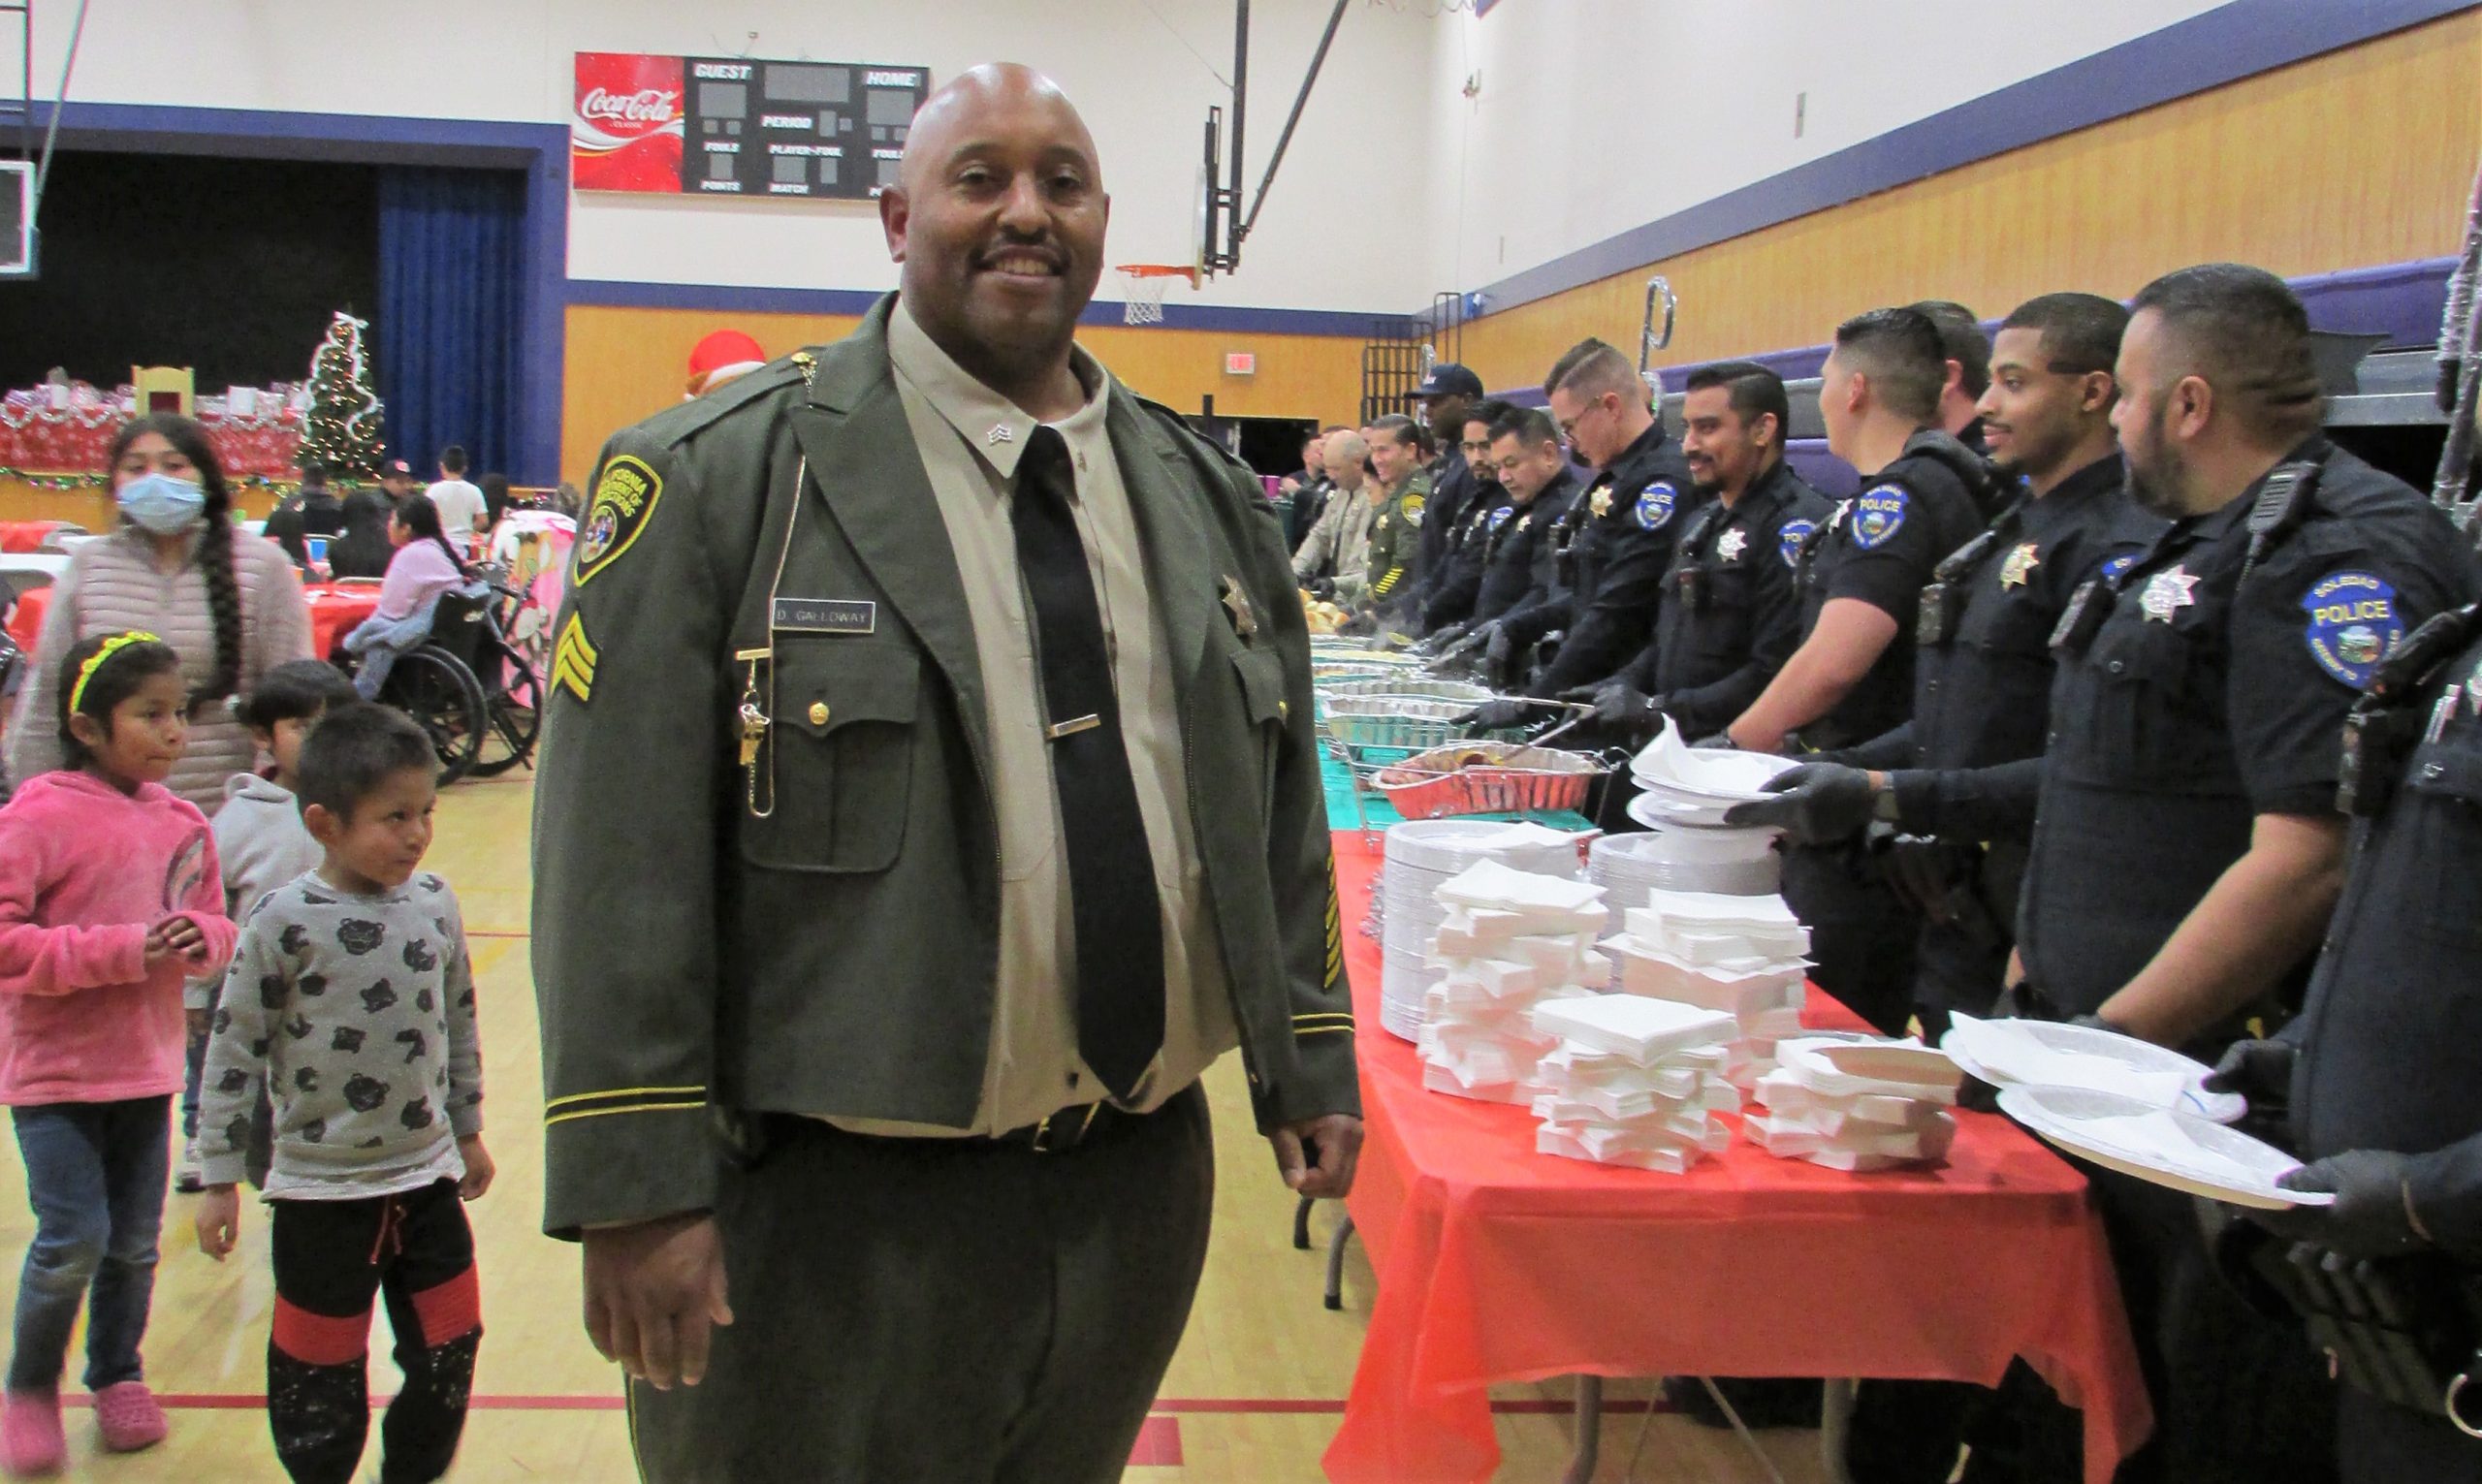 Prison sergeant stands beside the serving line at a community holiday dinner.